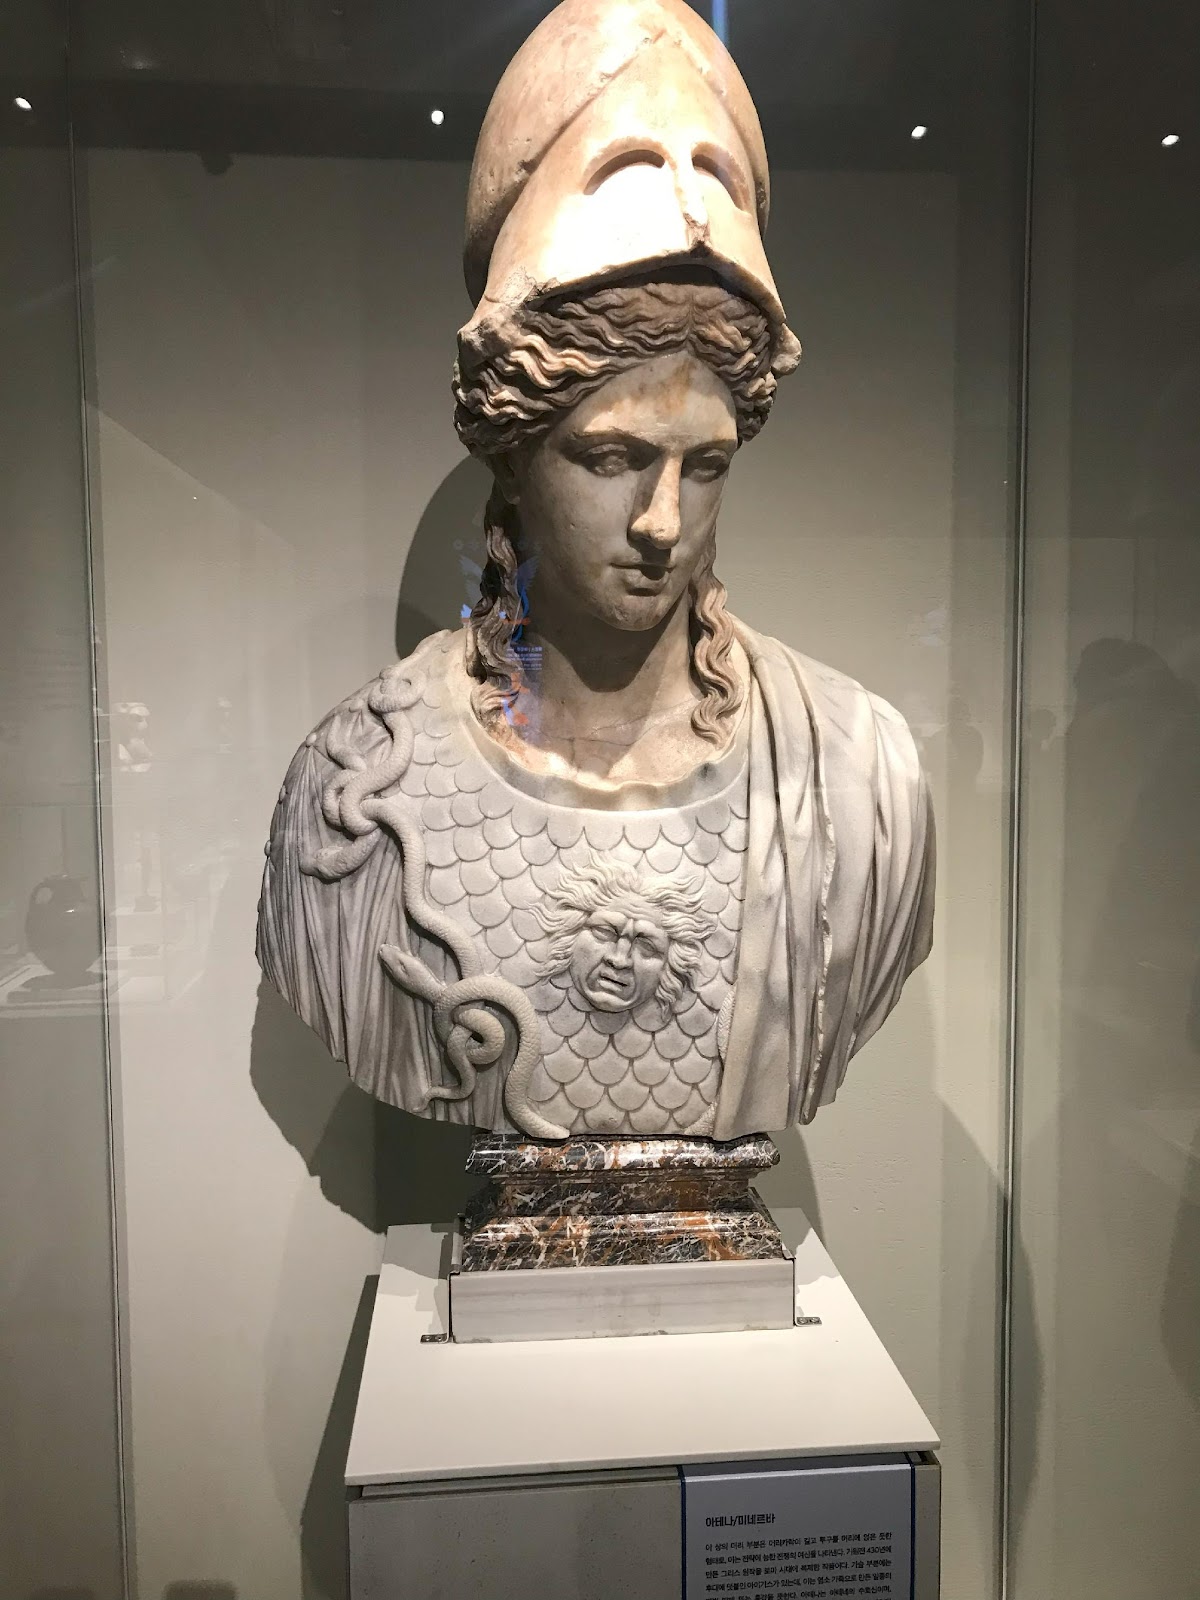 A statue of a person in a museum

Description automatically generated with low confidence